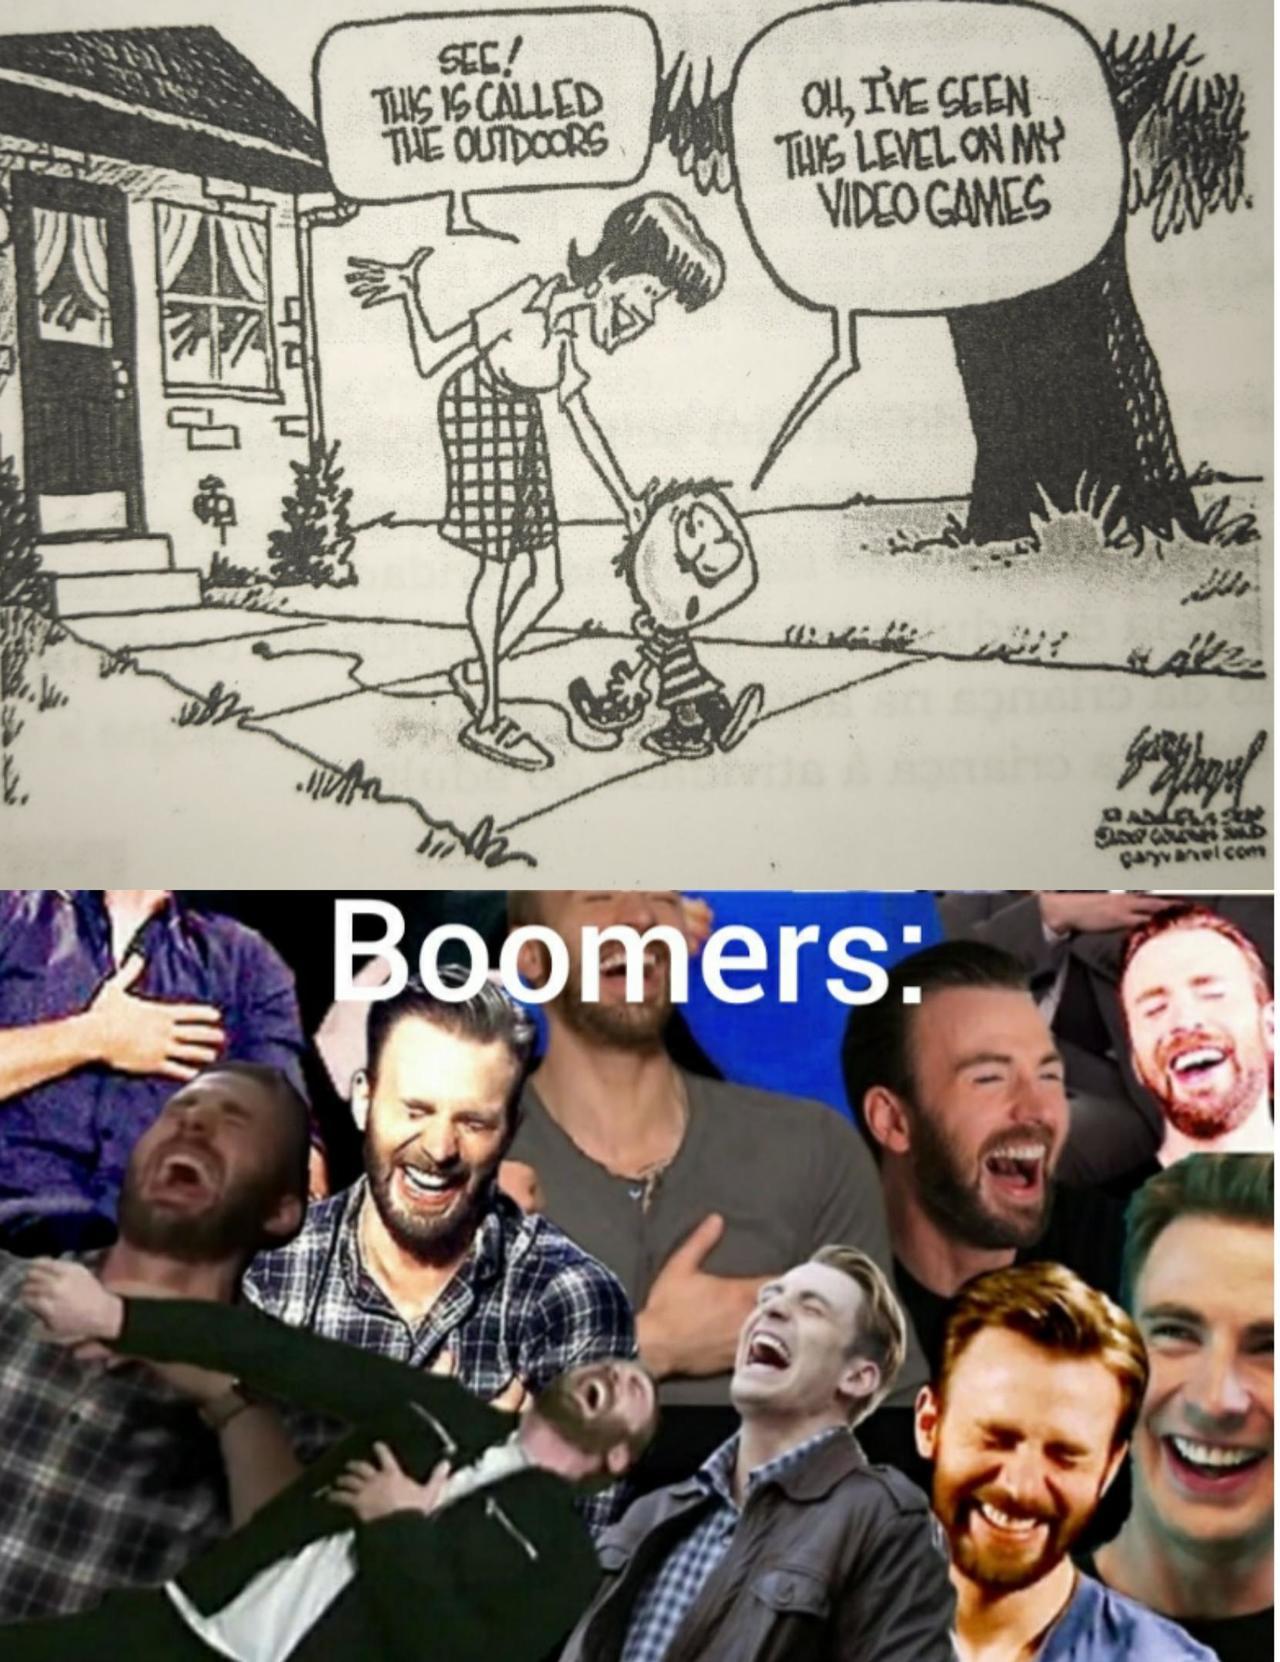 chris evans laughing collage - . Sec! This Is Called The Outdoors Oh, Ive Seen Tiks Level On My Video Games Cayenelcom " Boomers